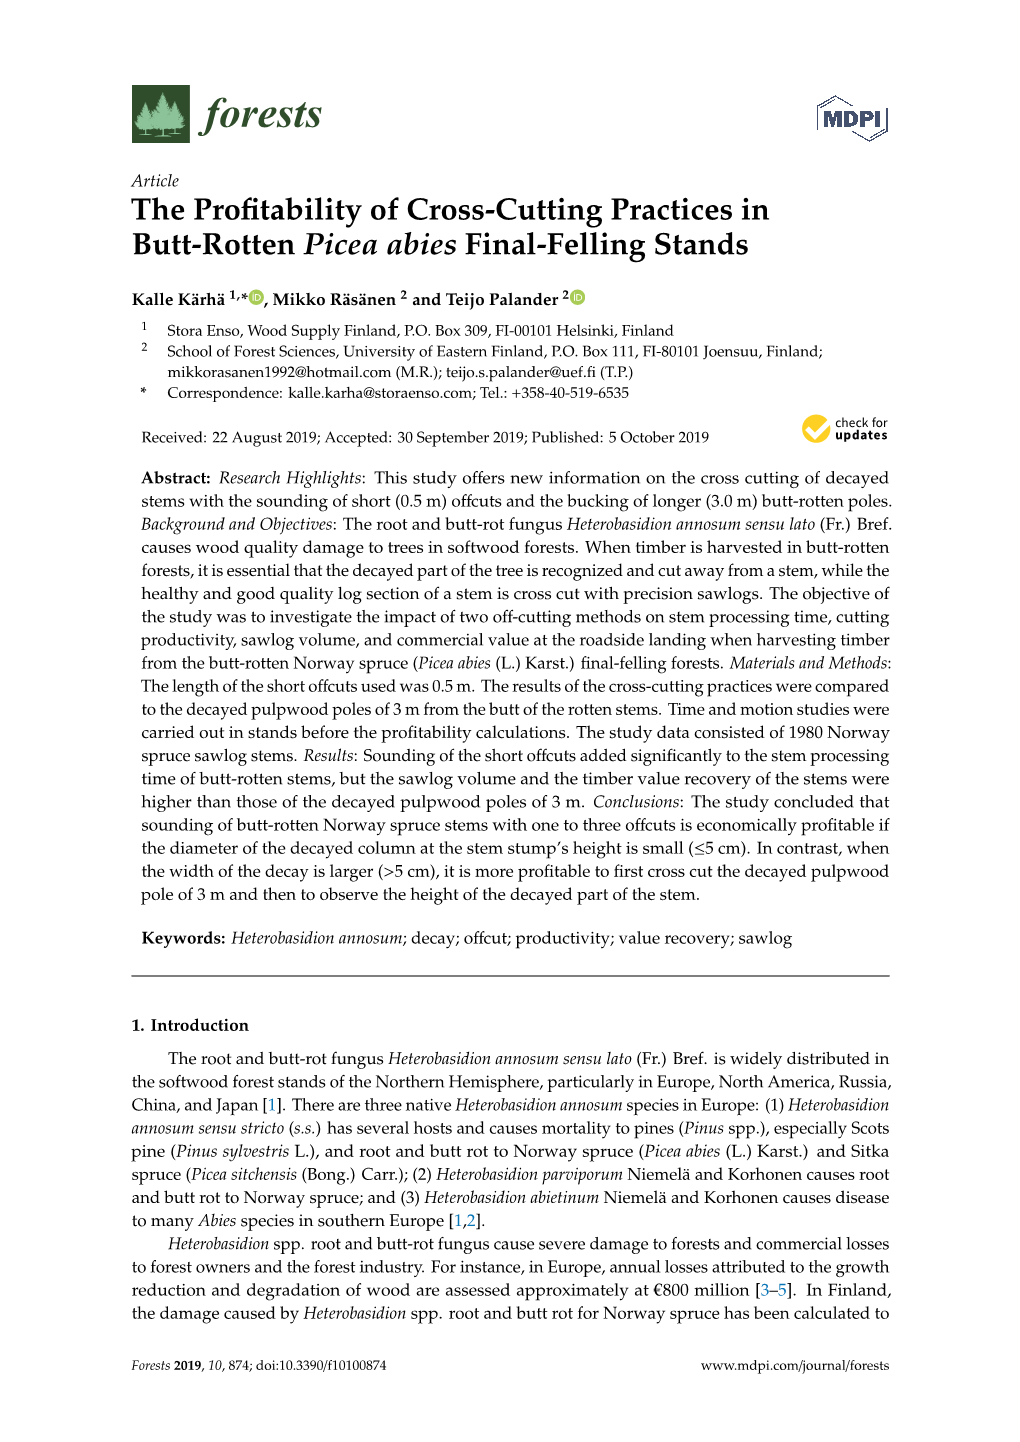 The Profitability of Cross-Cutting Practices in Butt-Rotten Picea Abies